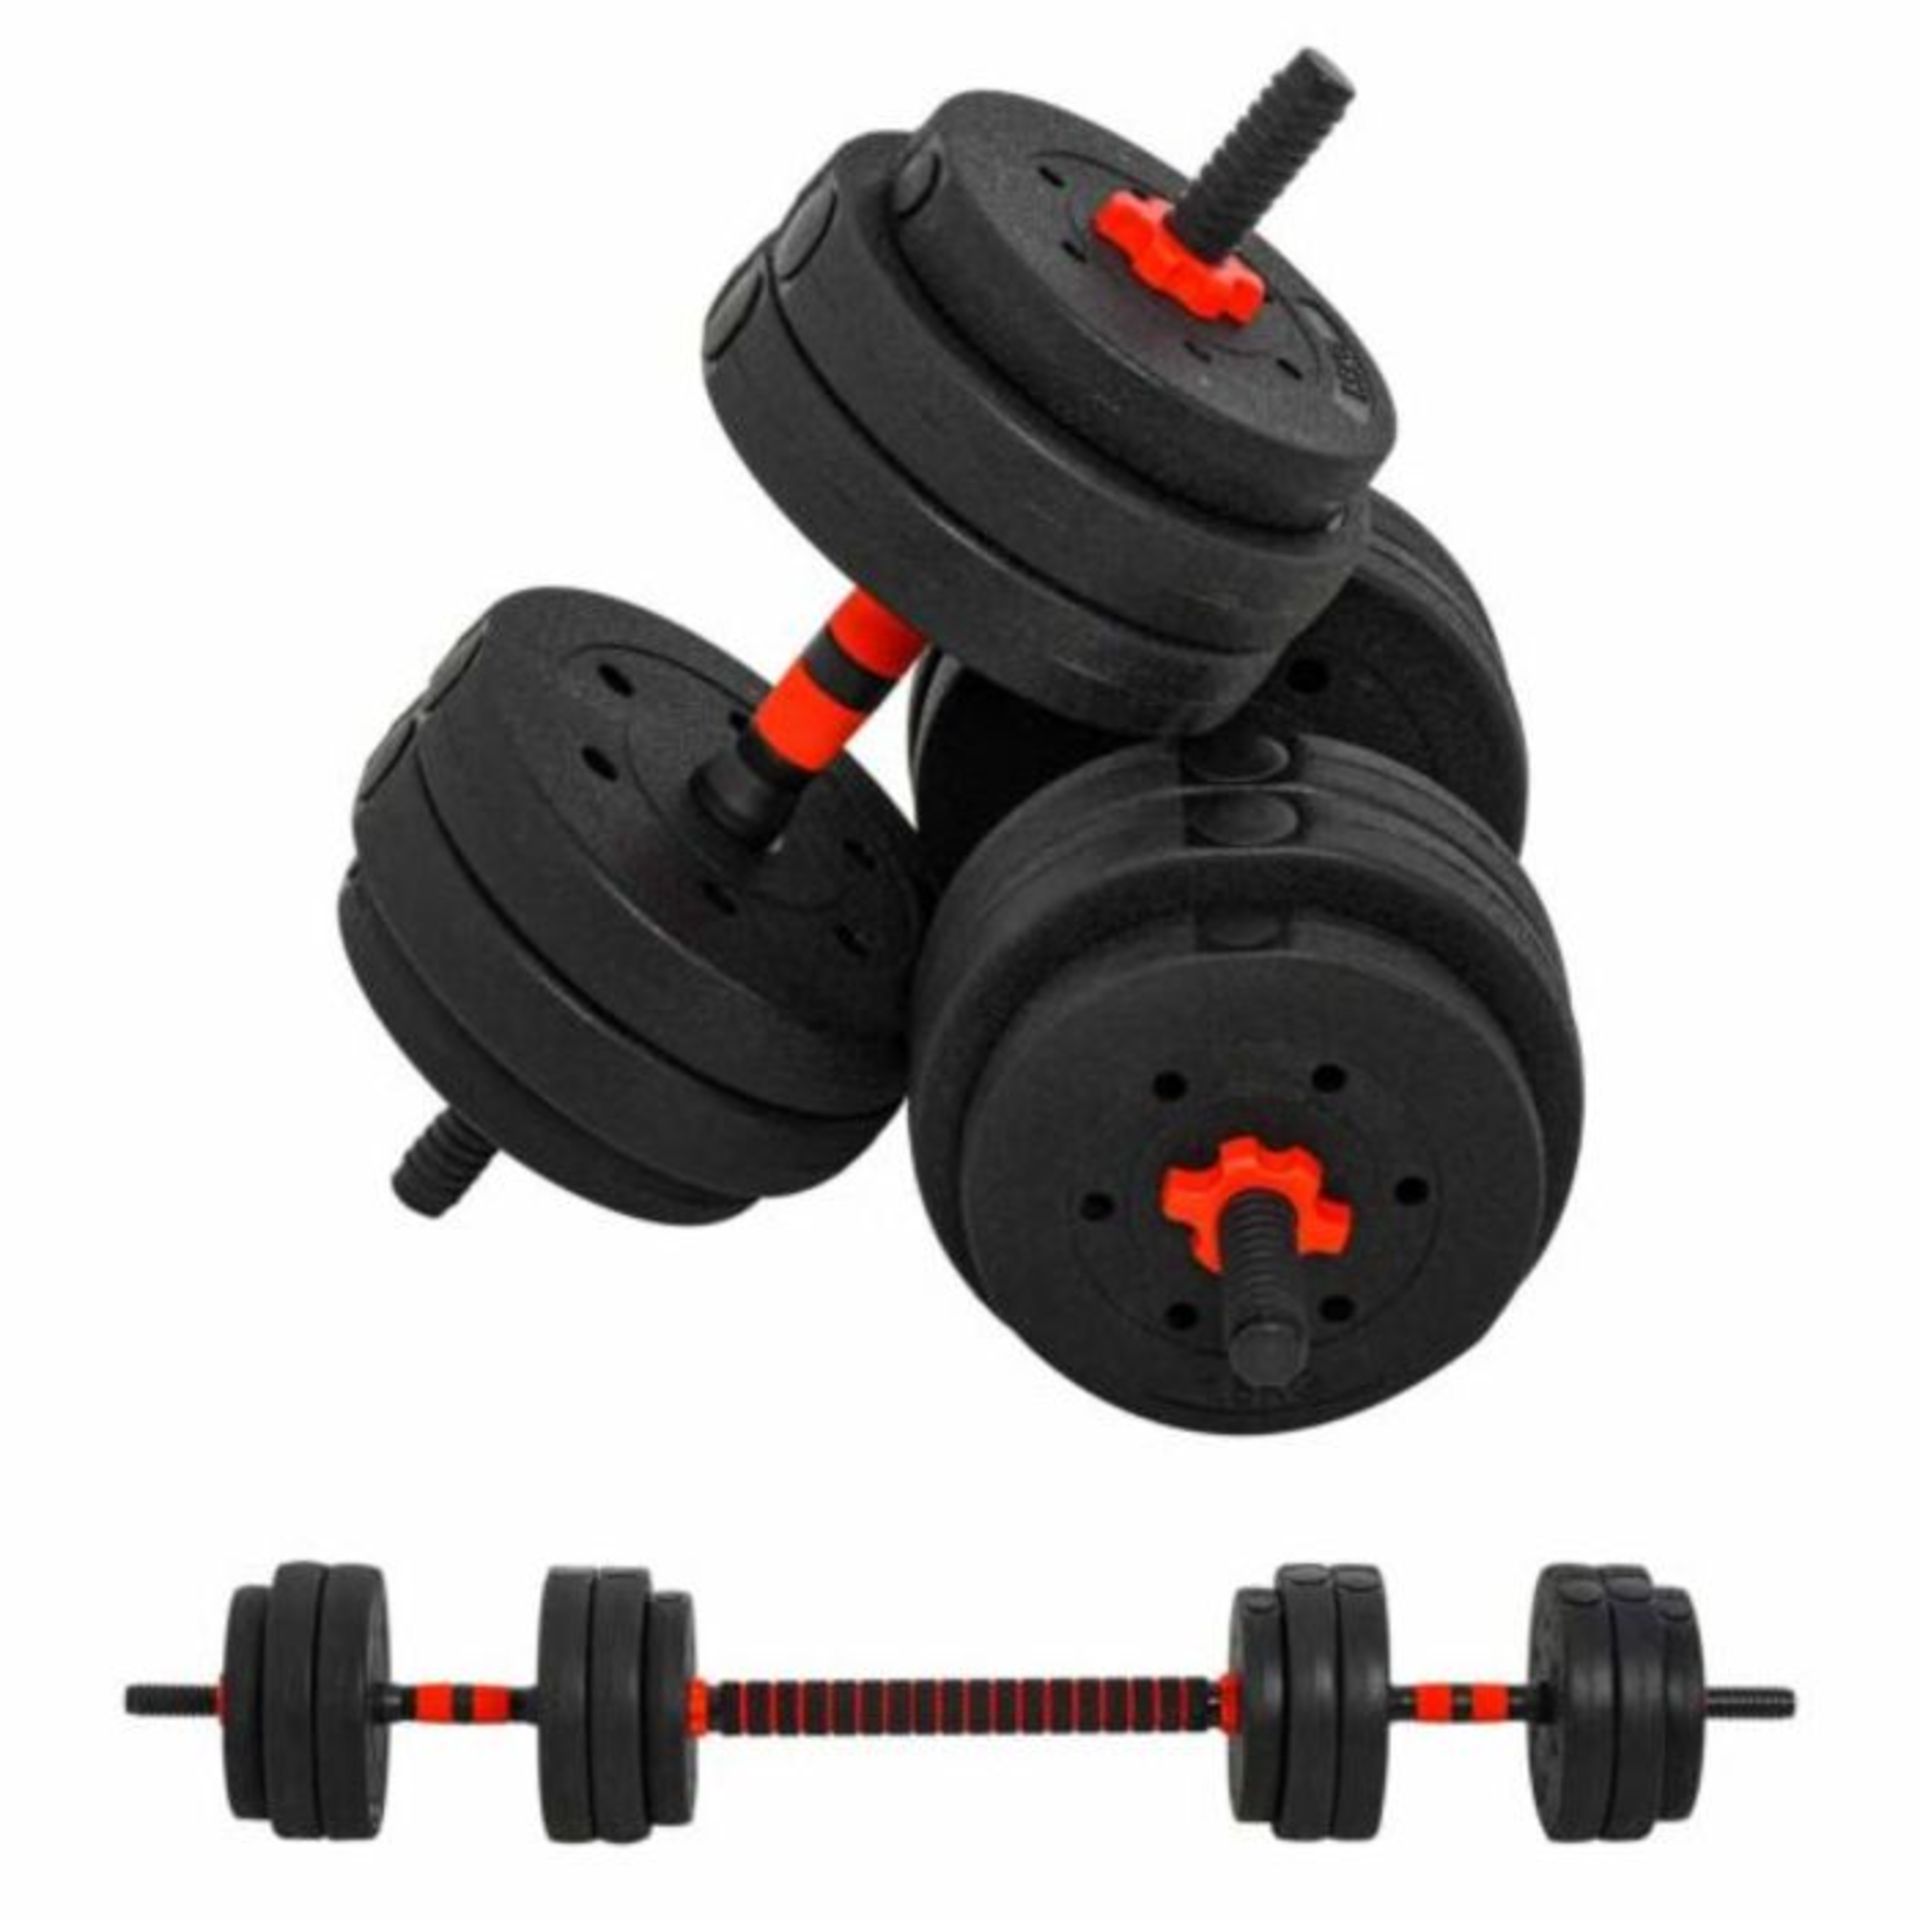 Hom Com 2 in1 Barbell/Dumb bell 20kg weight set, new and boxed, Similar sets retail at around £40